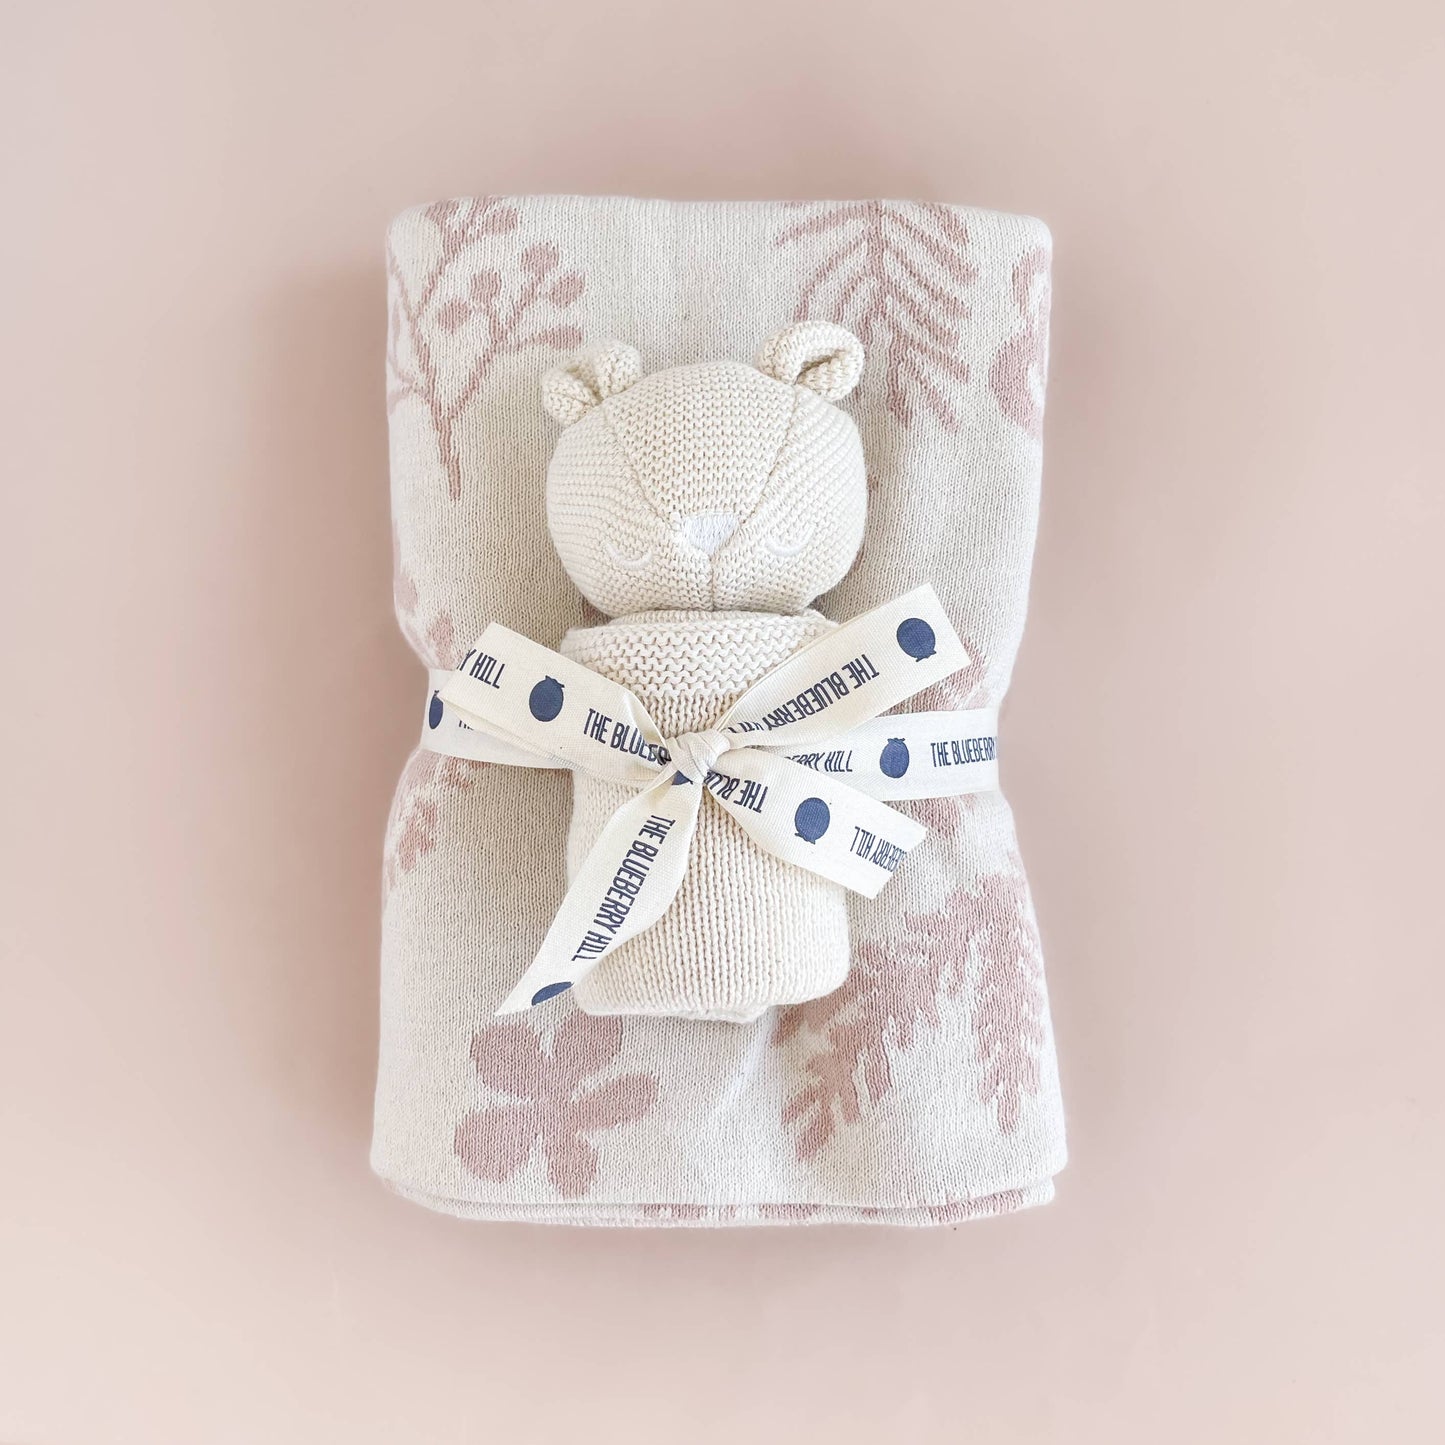 Floral Blanket + Lovey Baby Gift